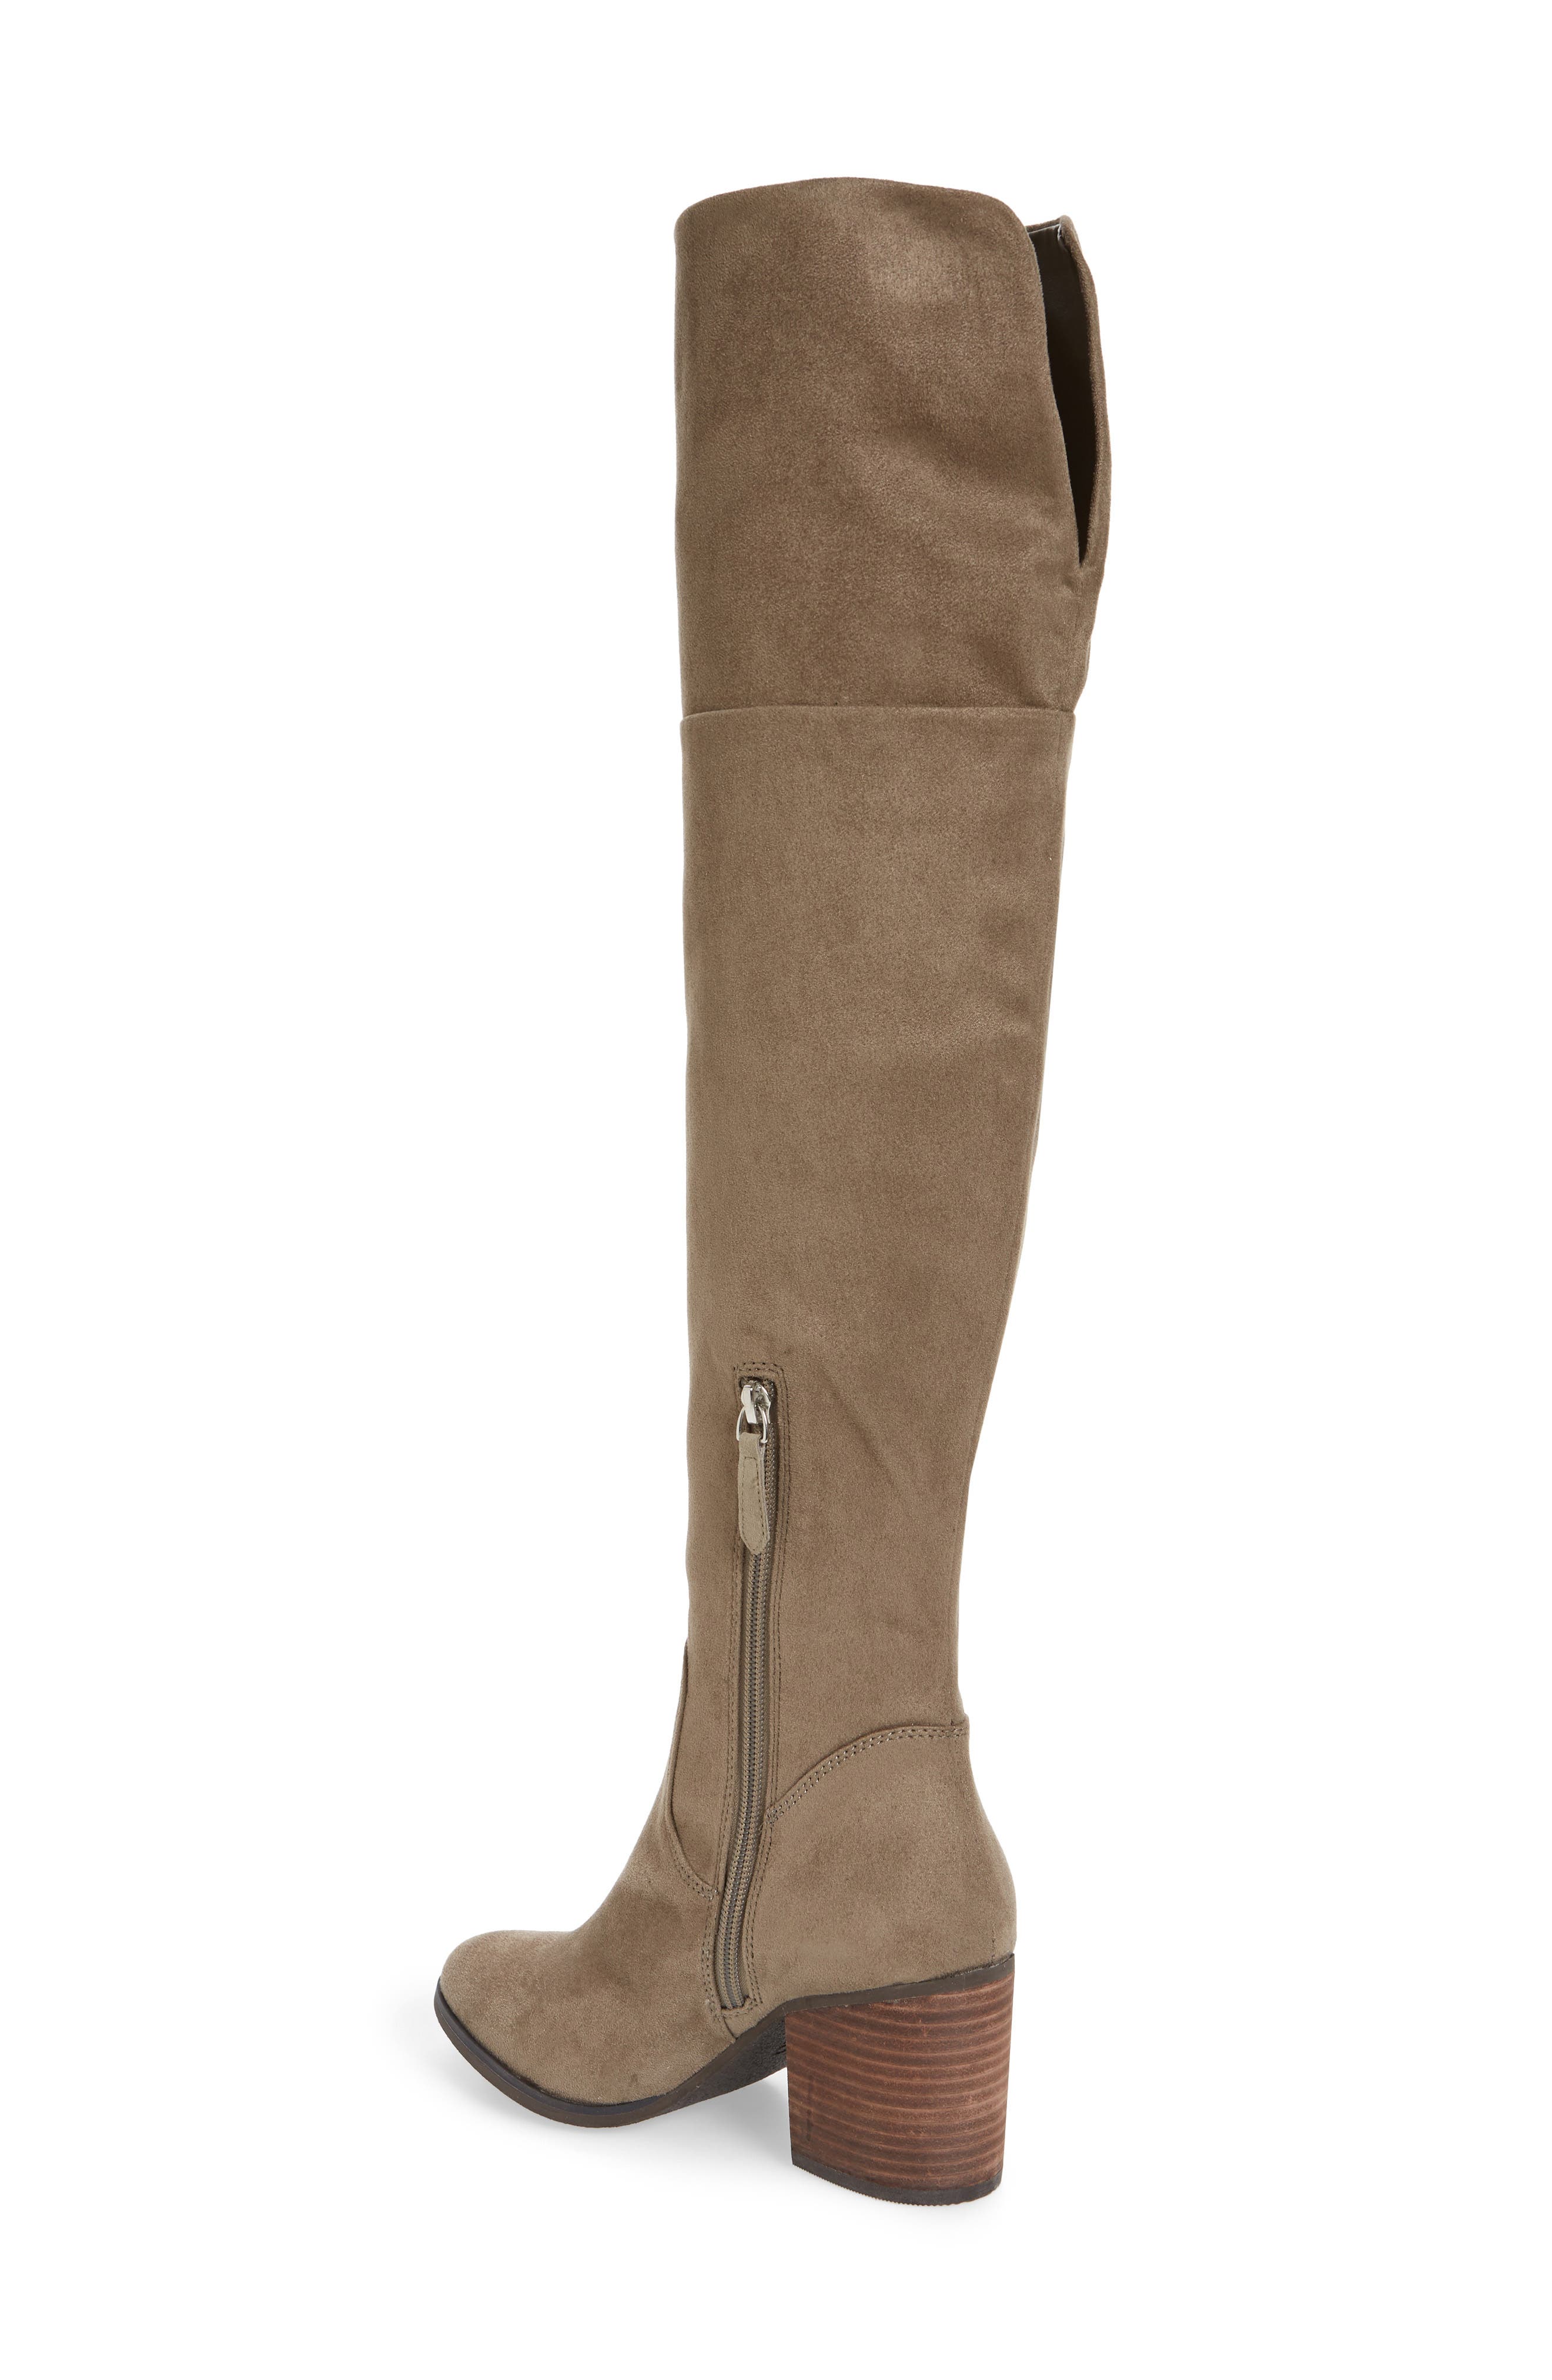 nordstrom rack over the knee boots